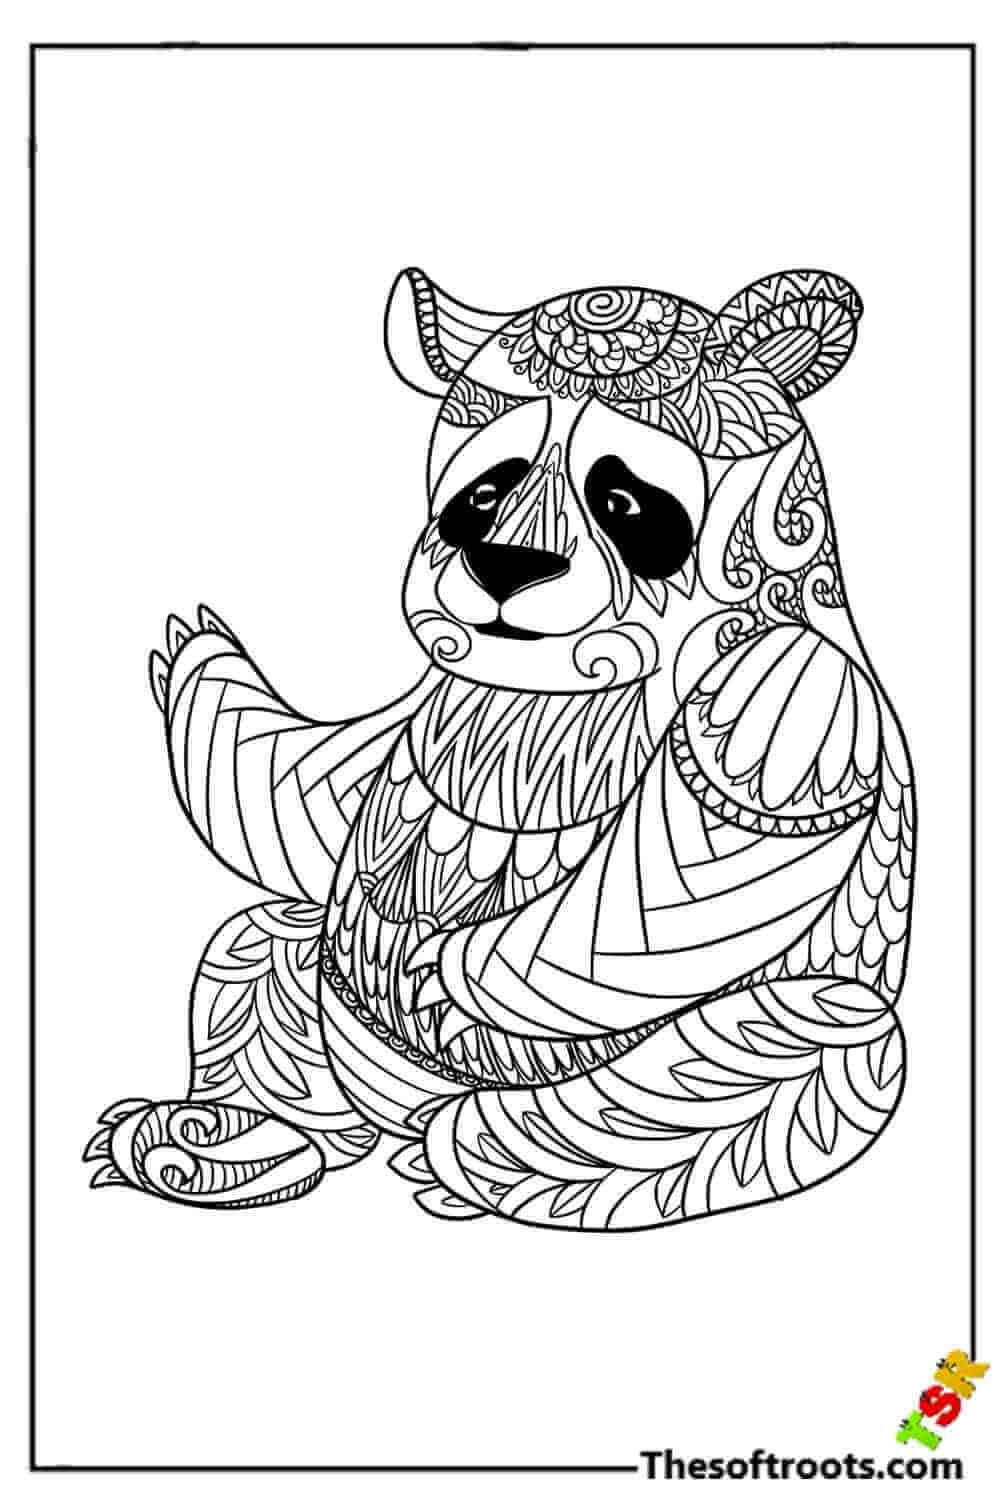 Adult Panda coloring pages